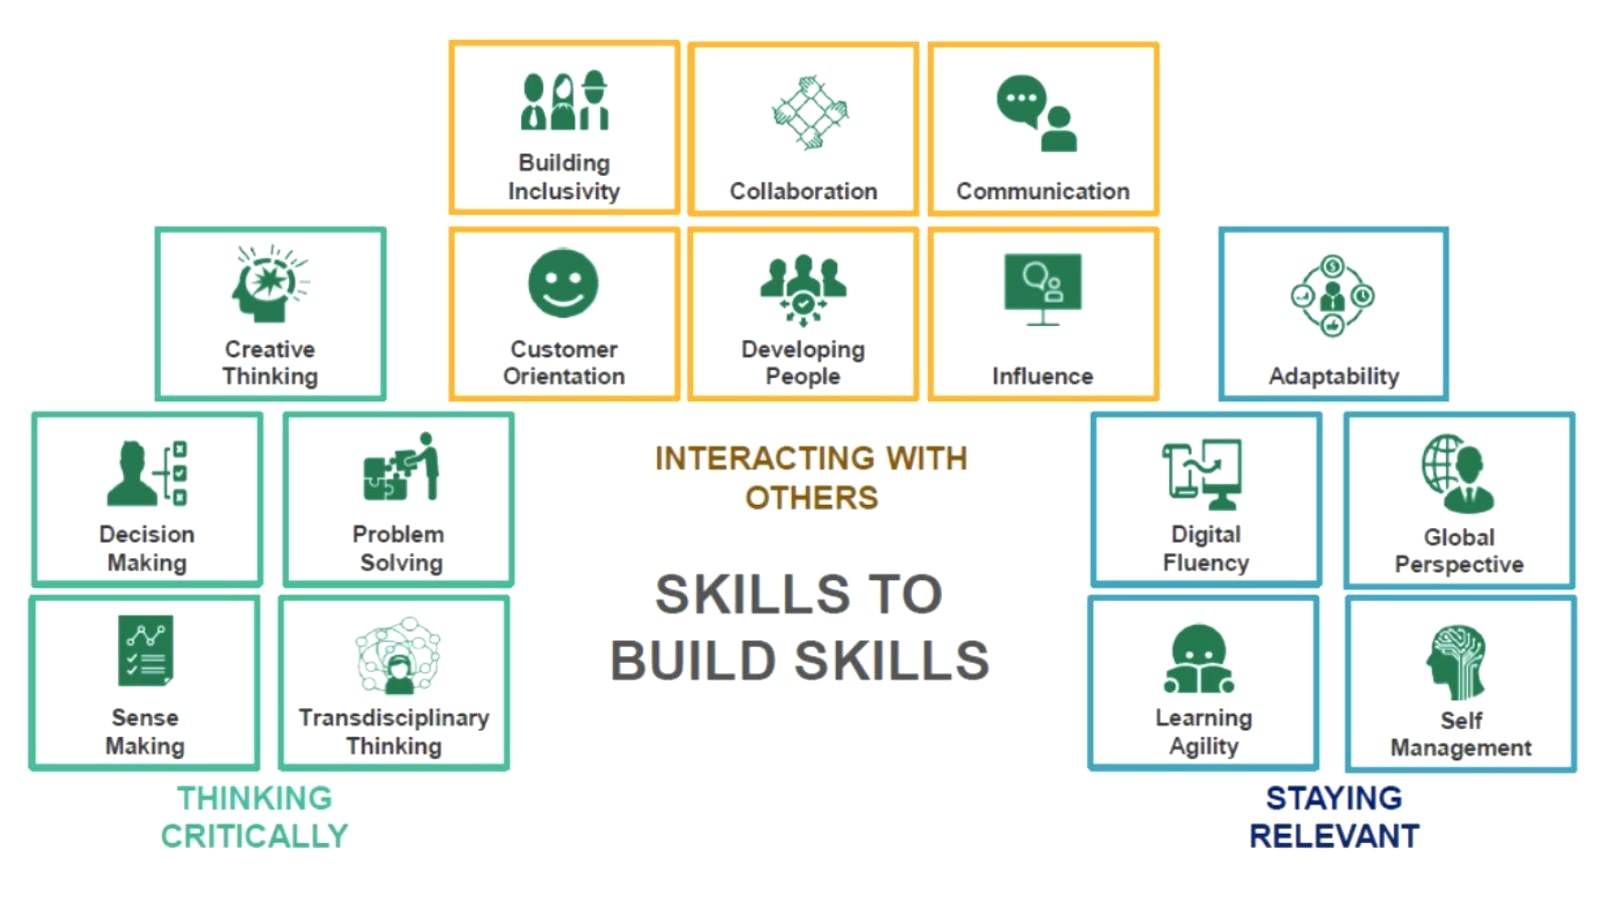 Most critical core skills to equip Singapore's workforce with